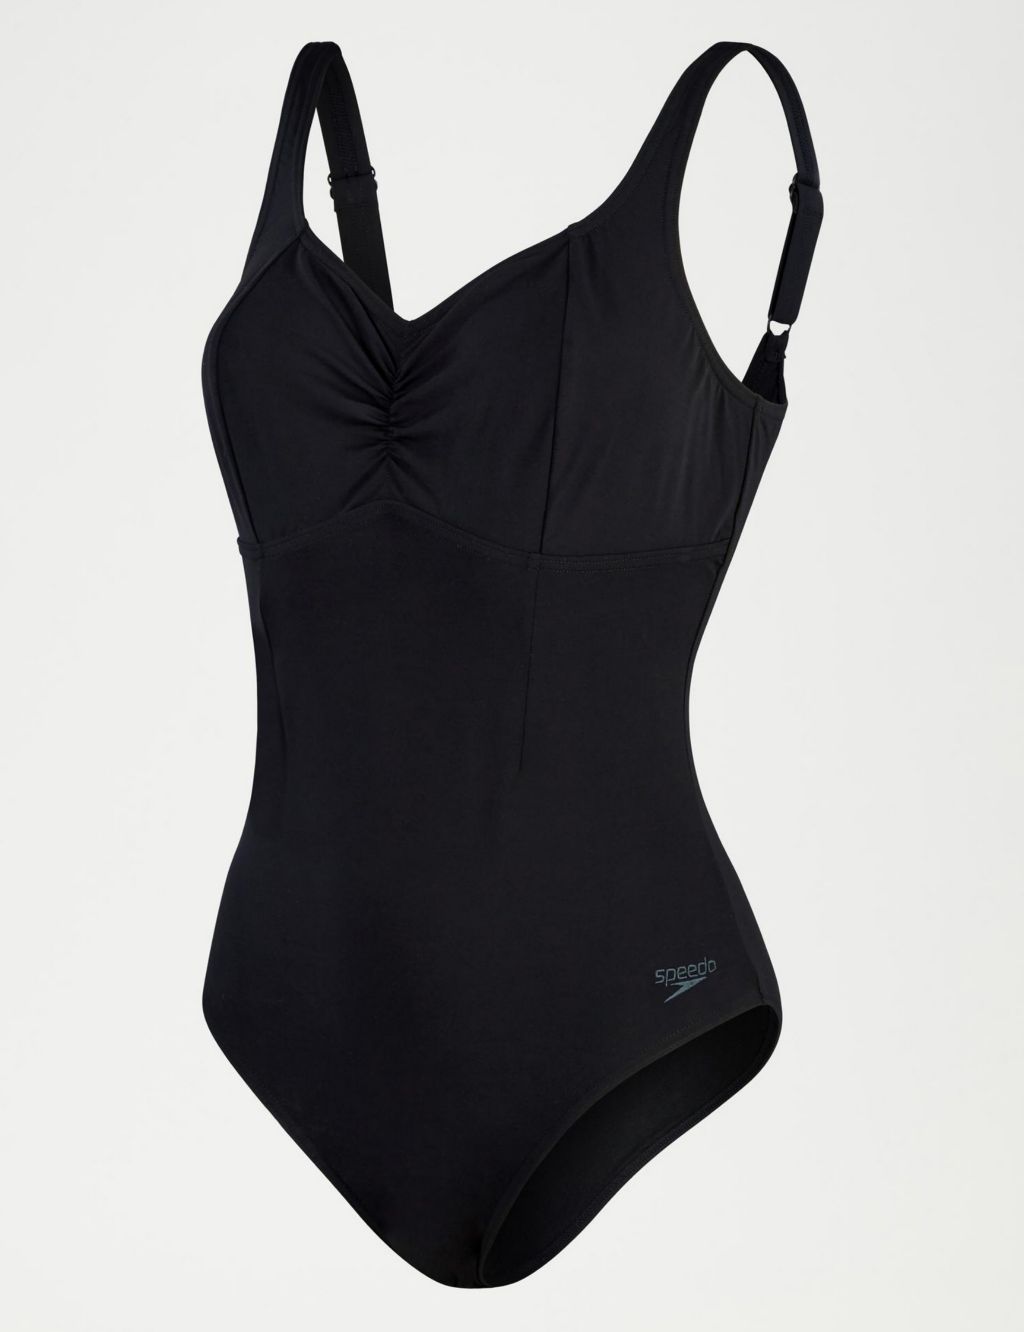 Aquanite Shaping Plunge Swimsuit image 2